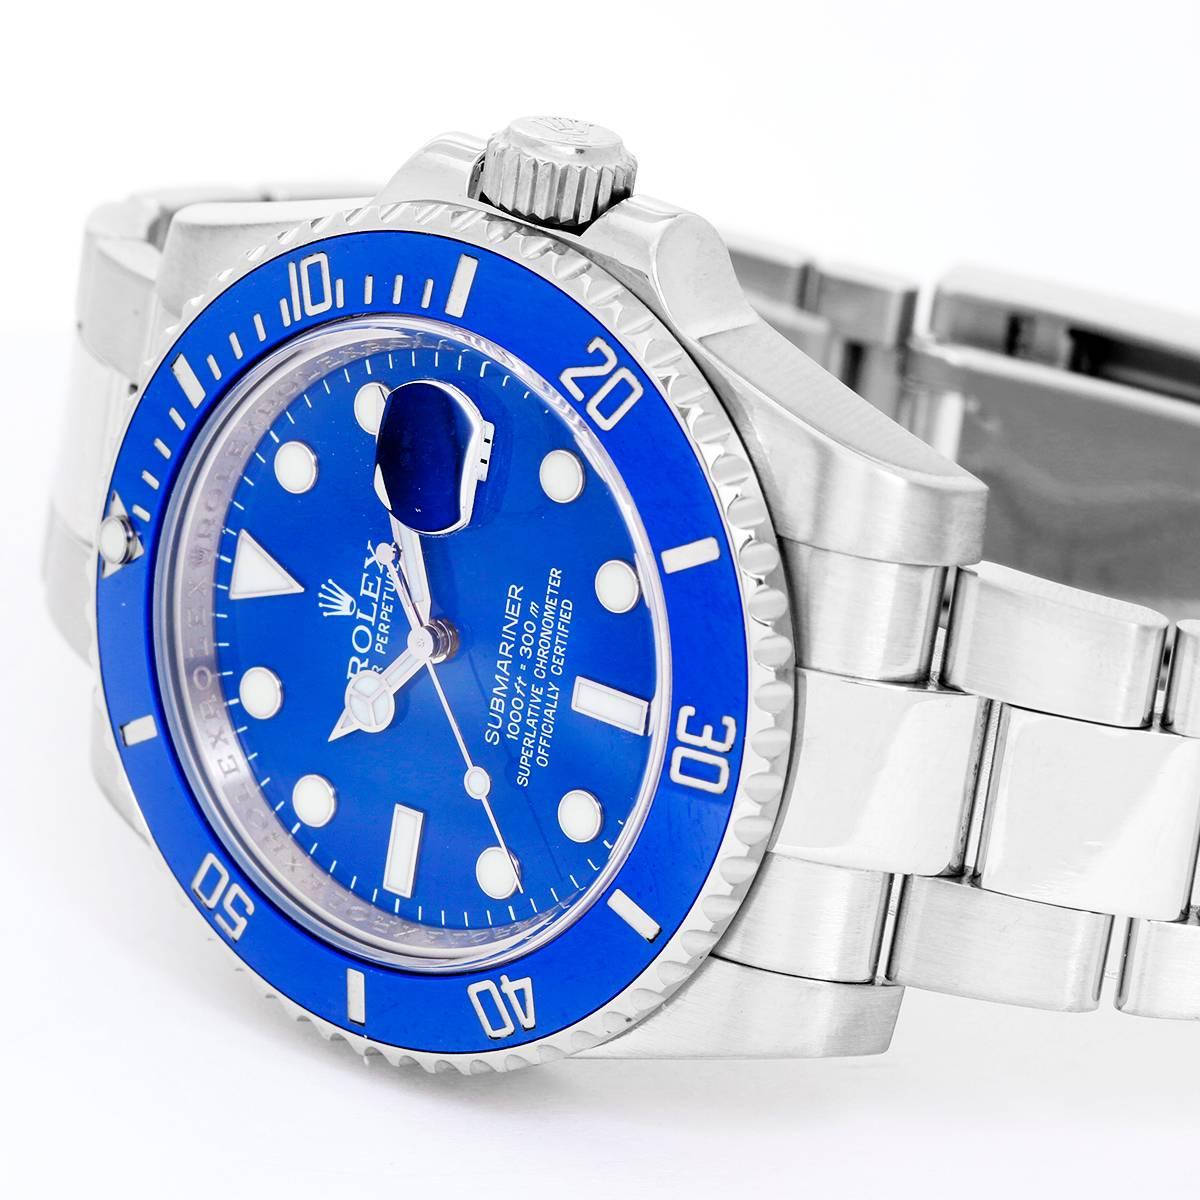 Automatic winding, 31 jewel, sapphire crystal. 18k white gold case with rotatable blue ceramic bezel (40mm diameter). Blue dial with luminous style markers; date at 3 o'clock position. 18k white gold Oyster bracelet with Glidelock clasp. Pre-owned